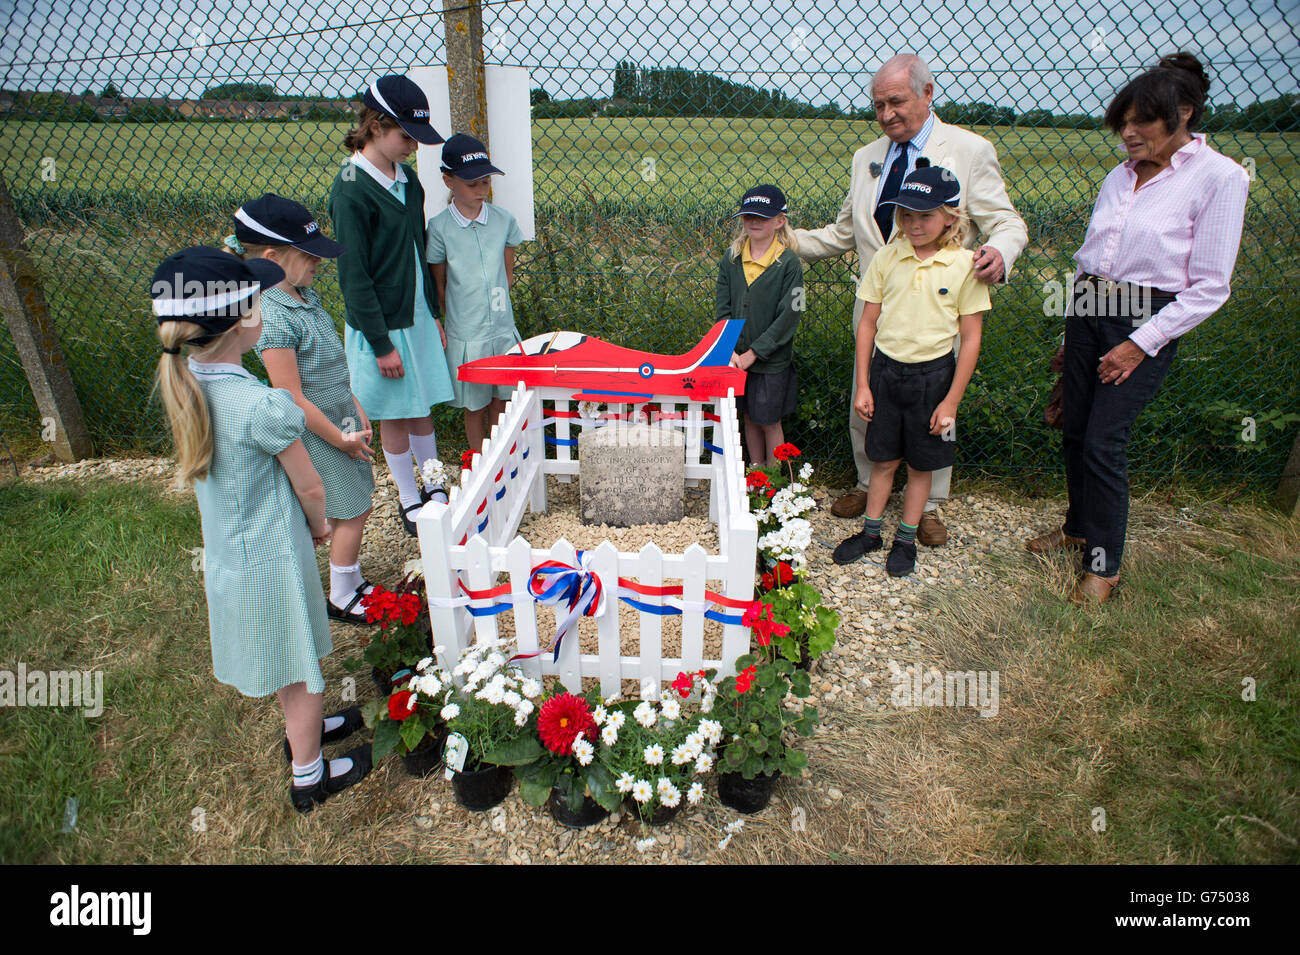 Henry Prince, a member of the first Red Arrows' team, with his wife Nikki and children from Kempsford Primary School, as they visit the newly restored gravestone at RAF Fairford of his dog Dusty, who was a mascot of the team. Stock Photo